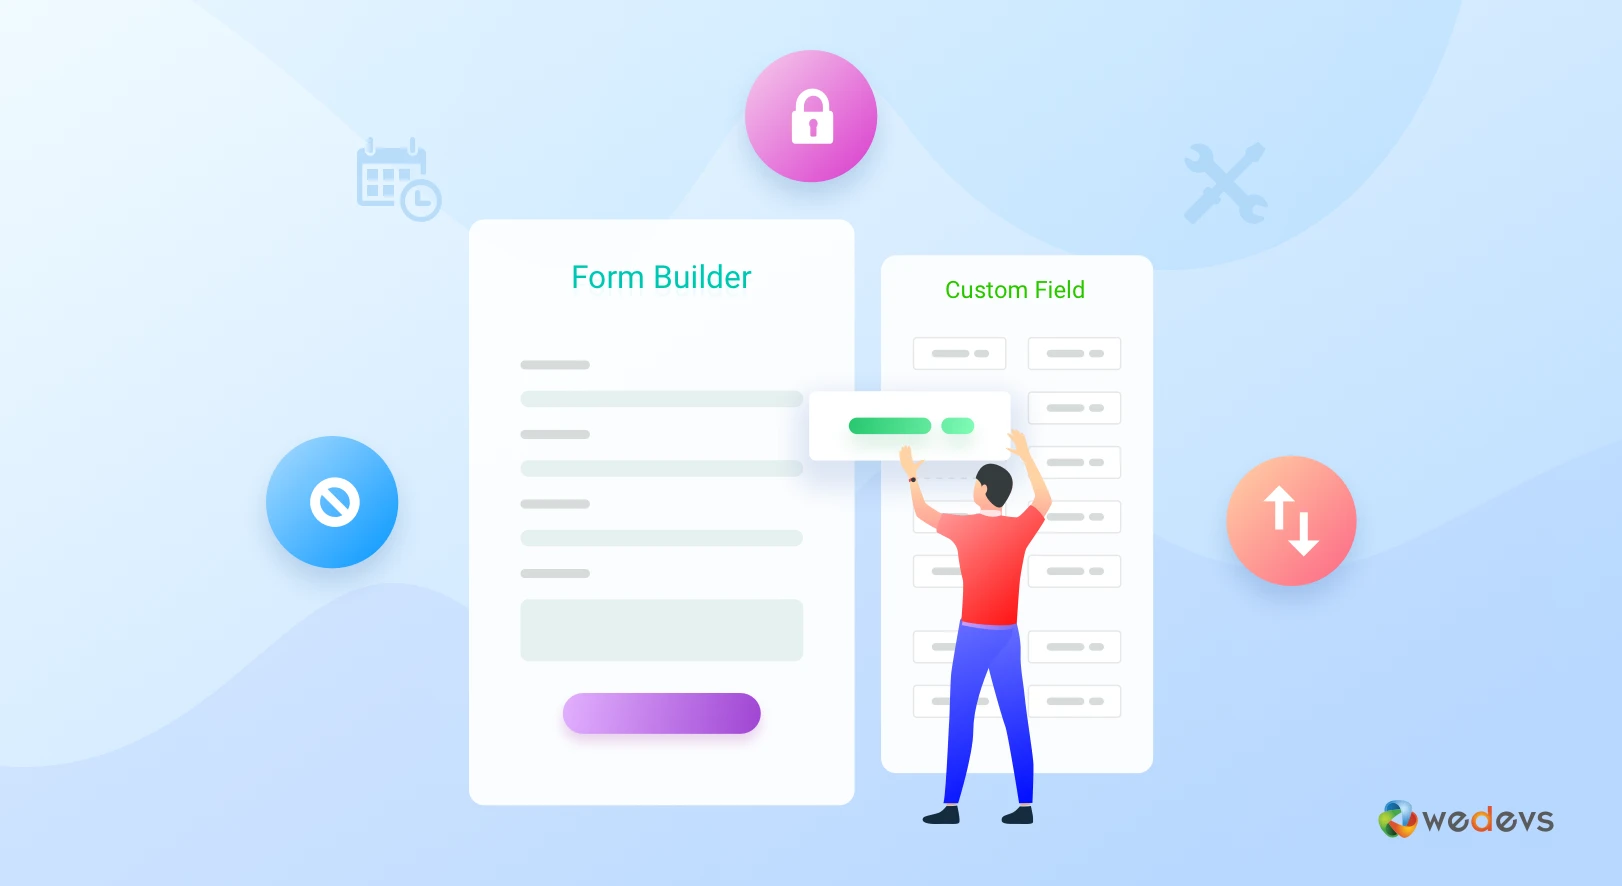 Most Useful Way A WordPress Contact Form Builder Should Perform in 2022